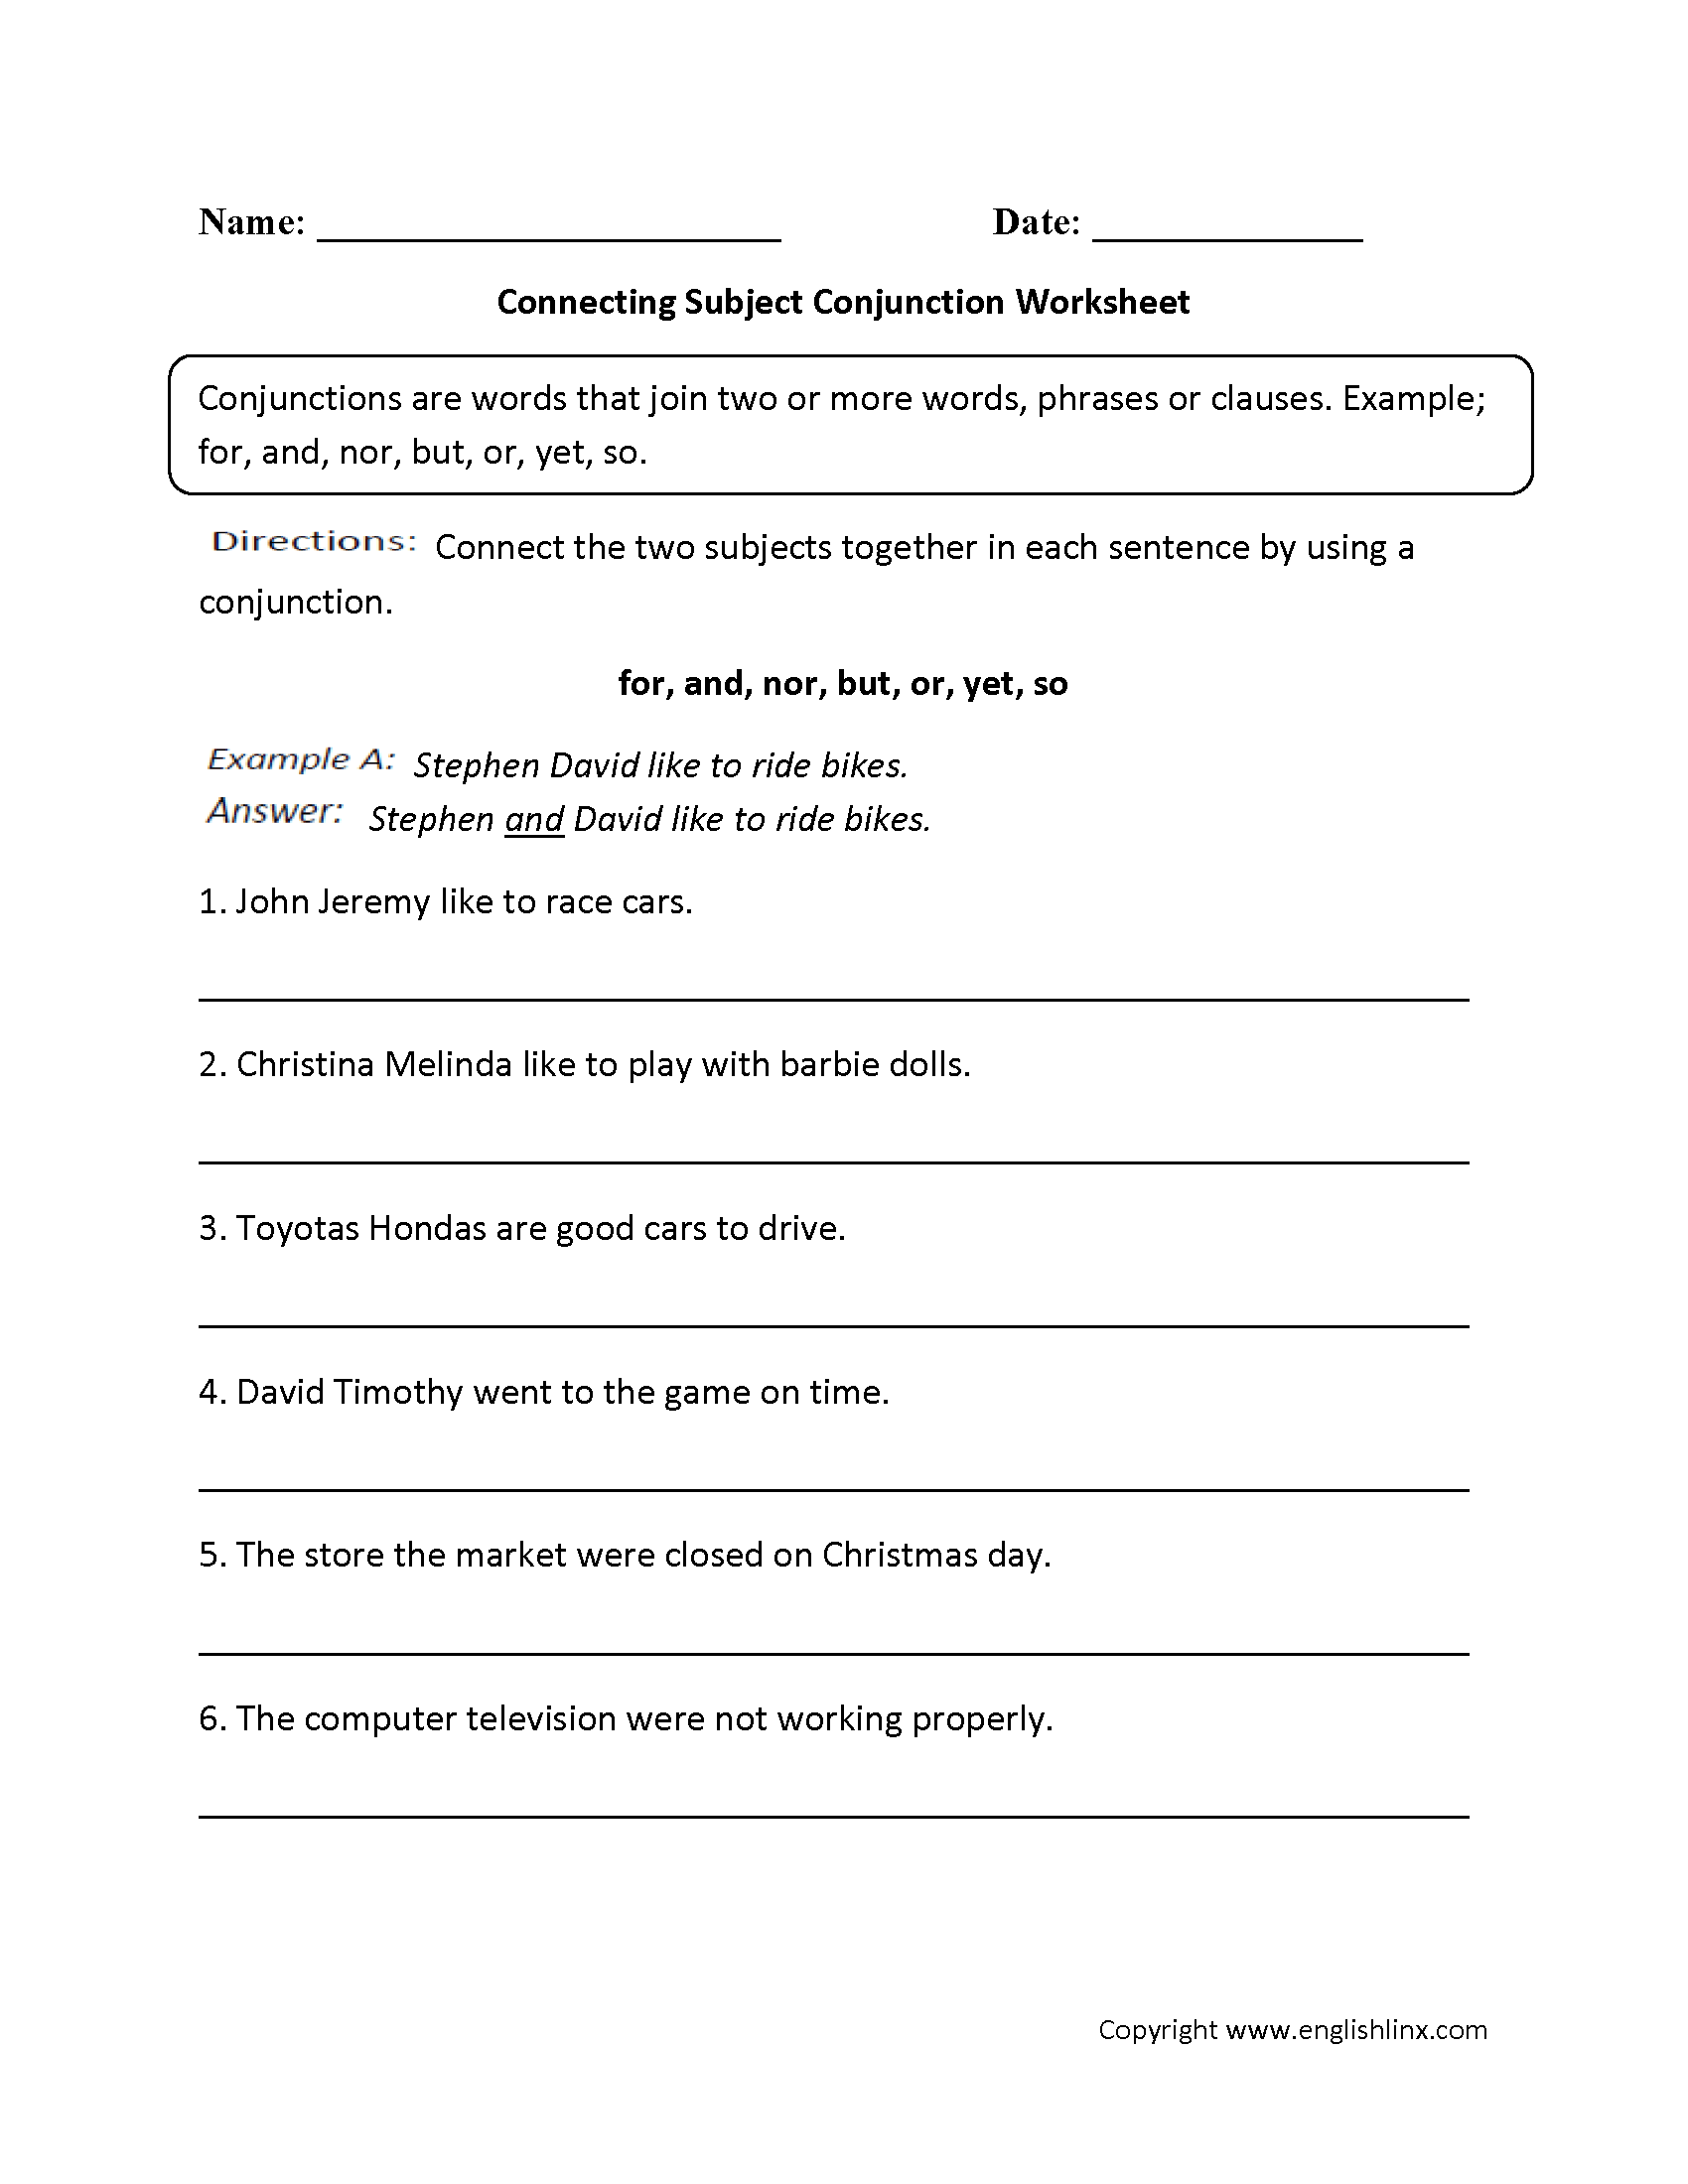 Connecting Subject Conjunction Worksheets